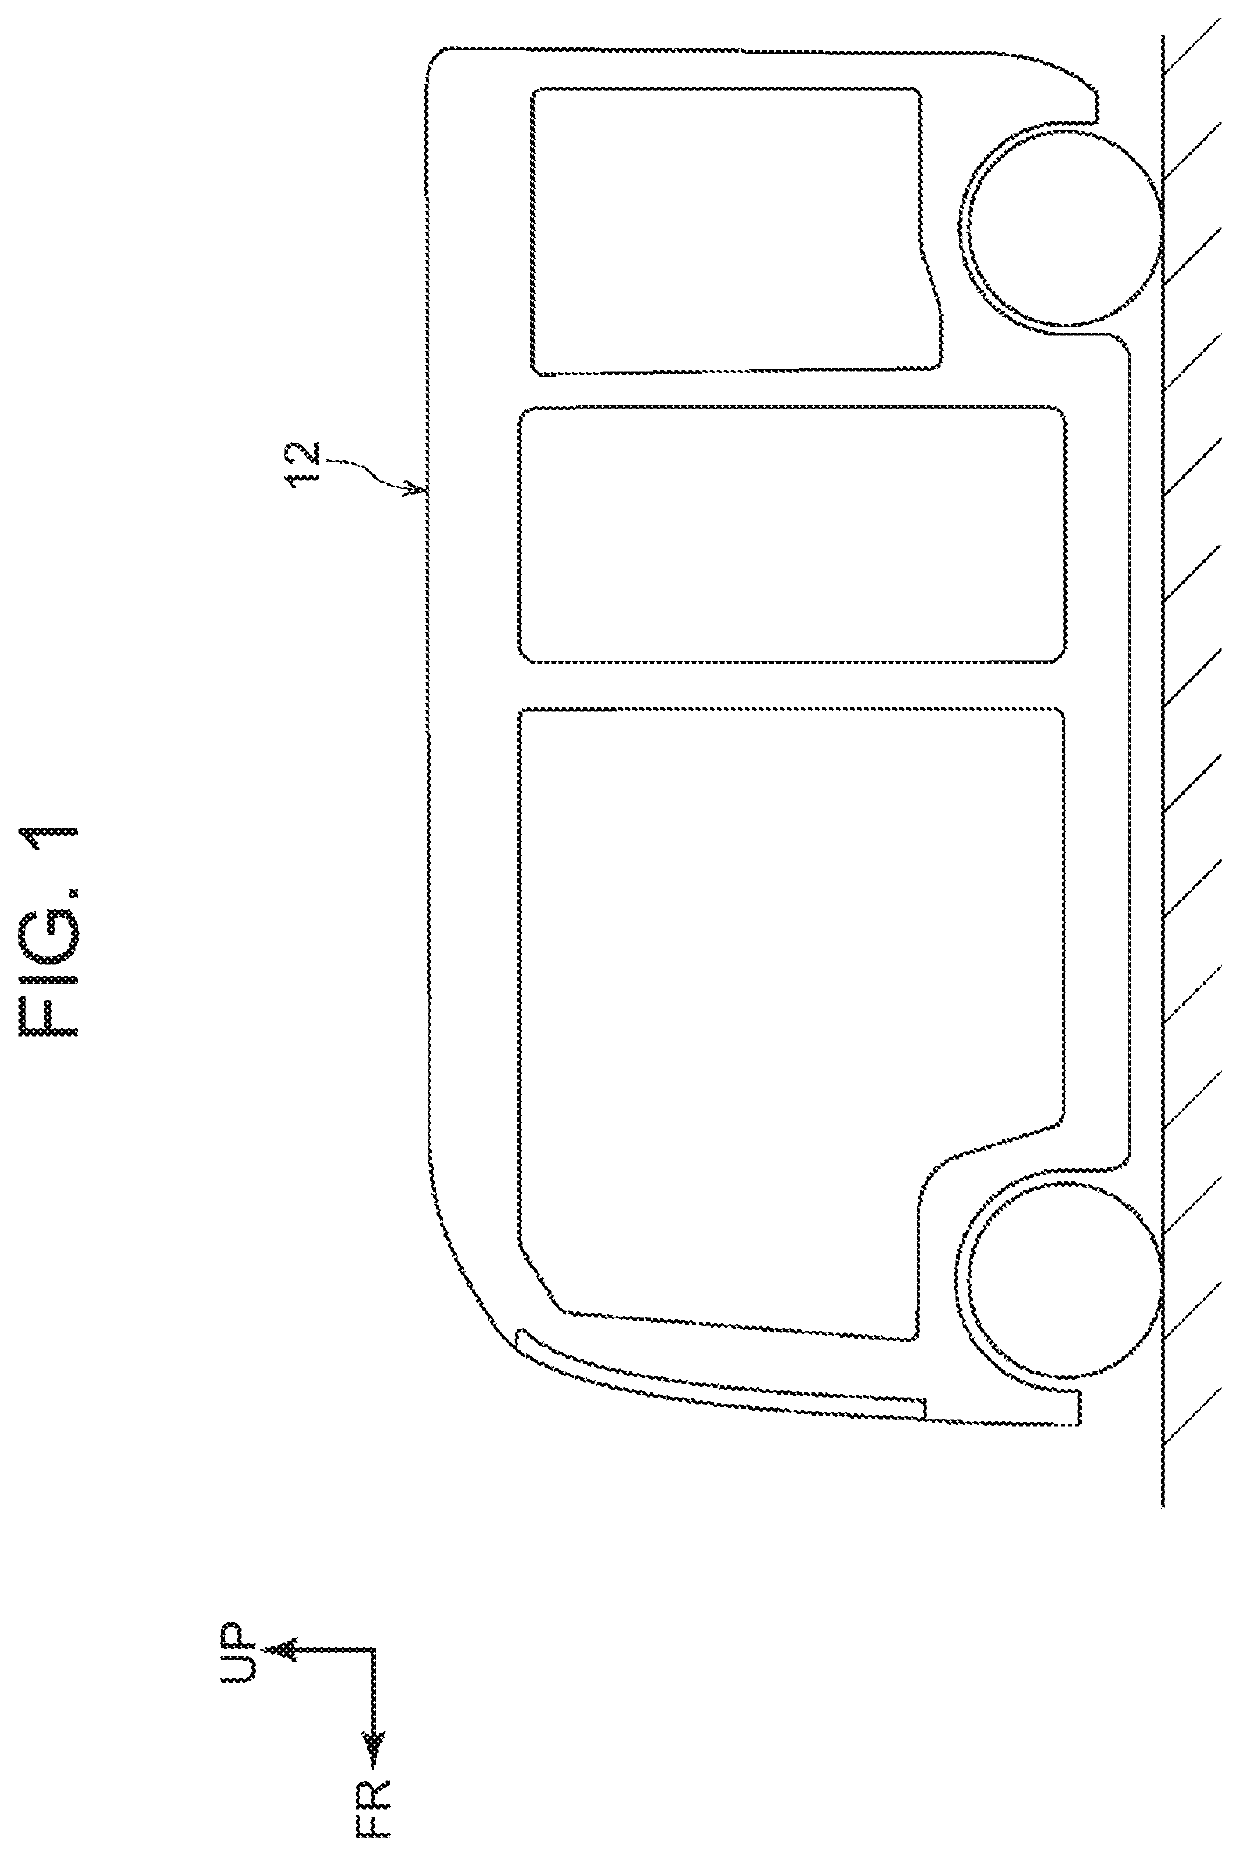 Child seat temporary holding structure in passenger motor vehicle